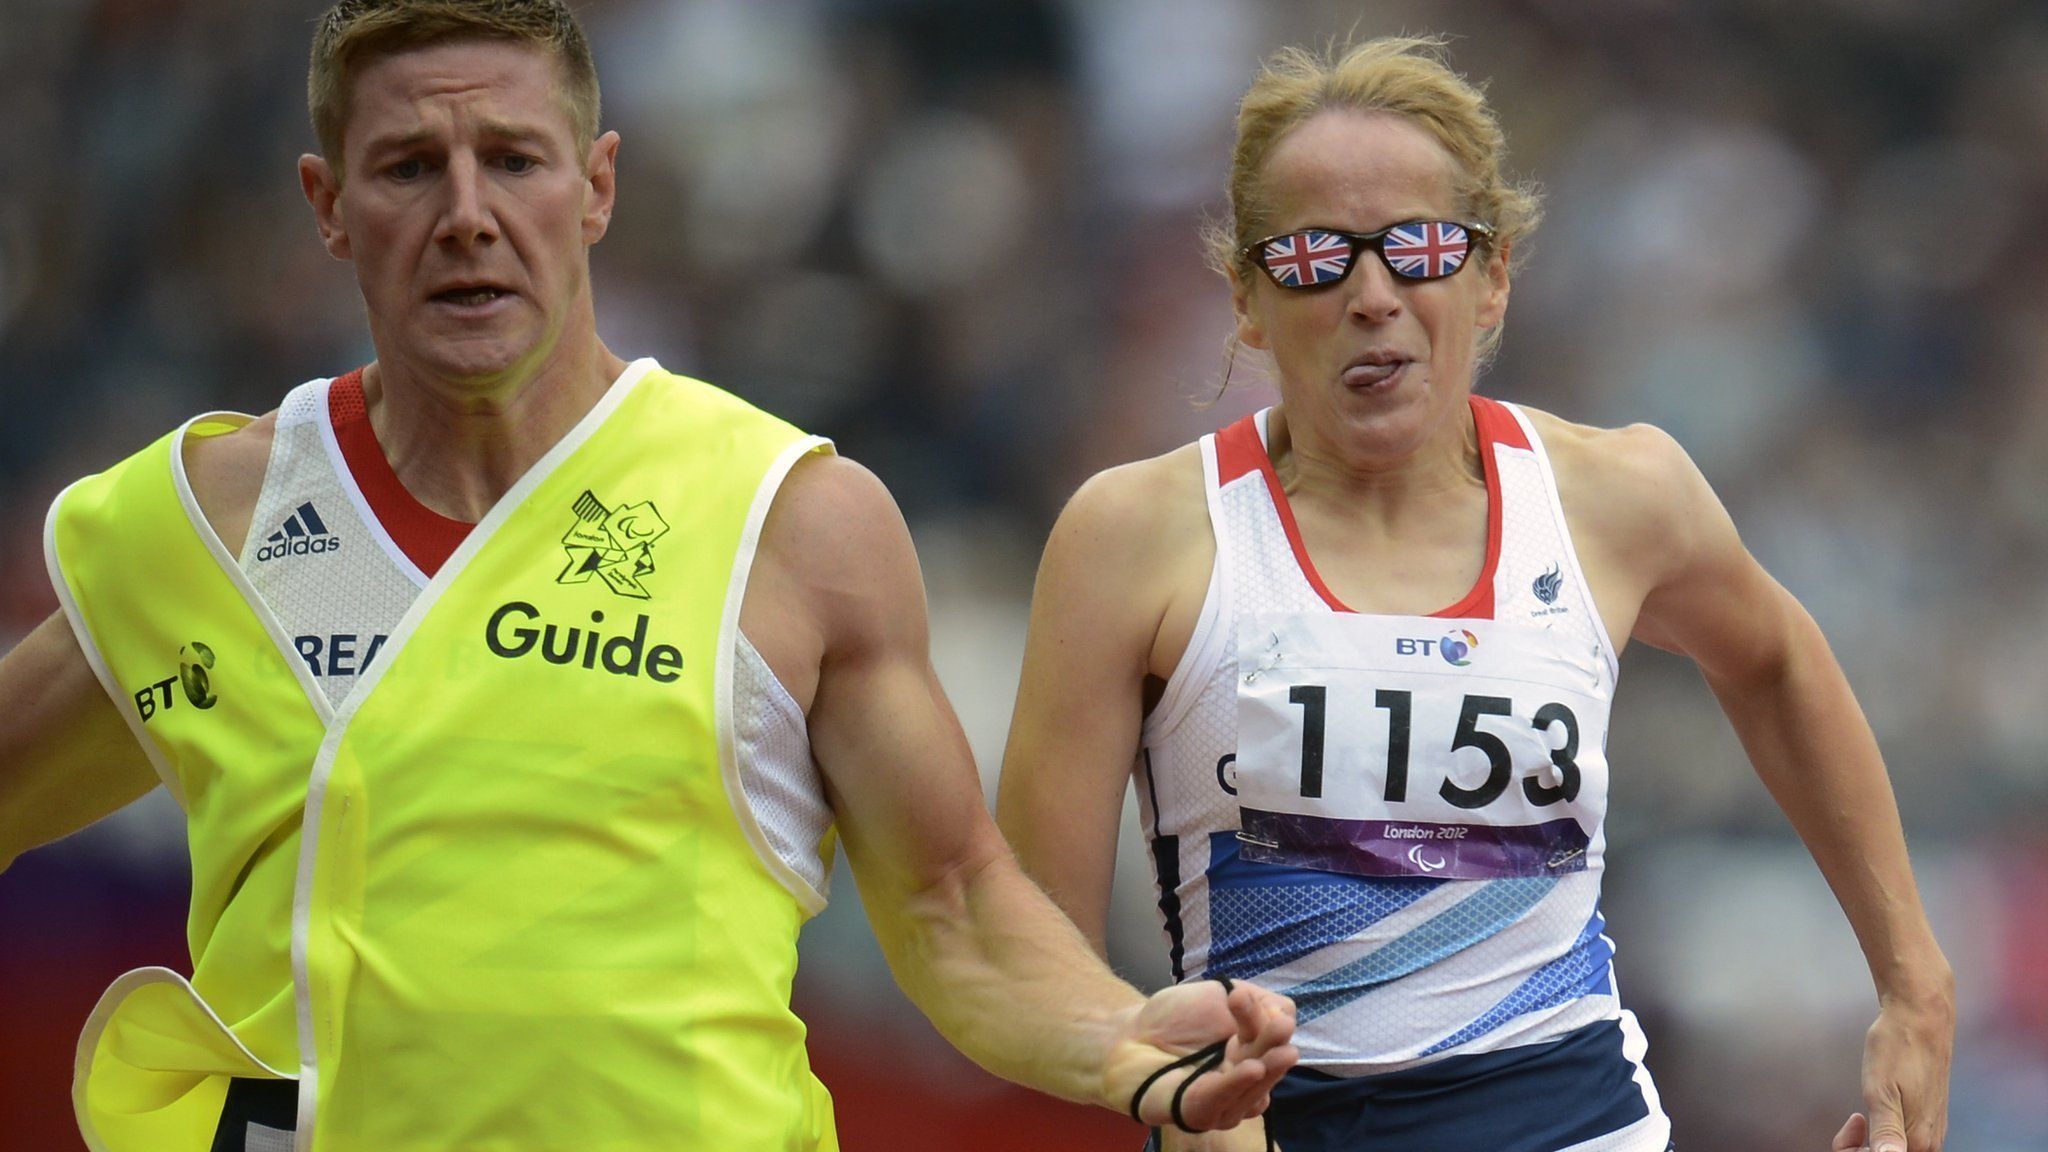 Tracey Hinton runs with her guide Steffan Hughes during the women's 200m T11 semi-finals at the London 2012 Paralympic Games